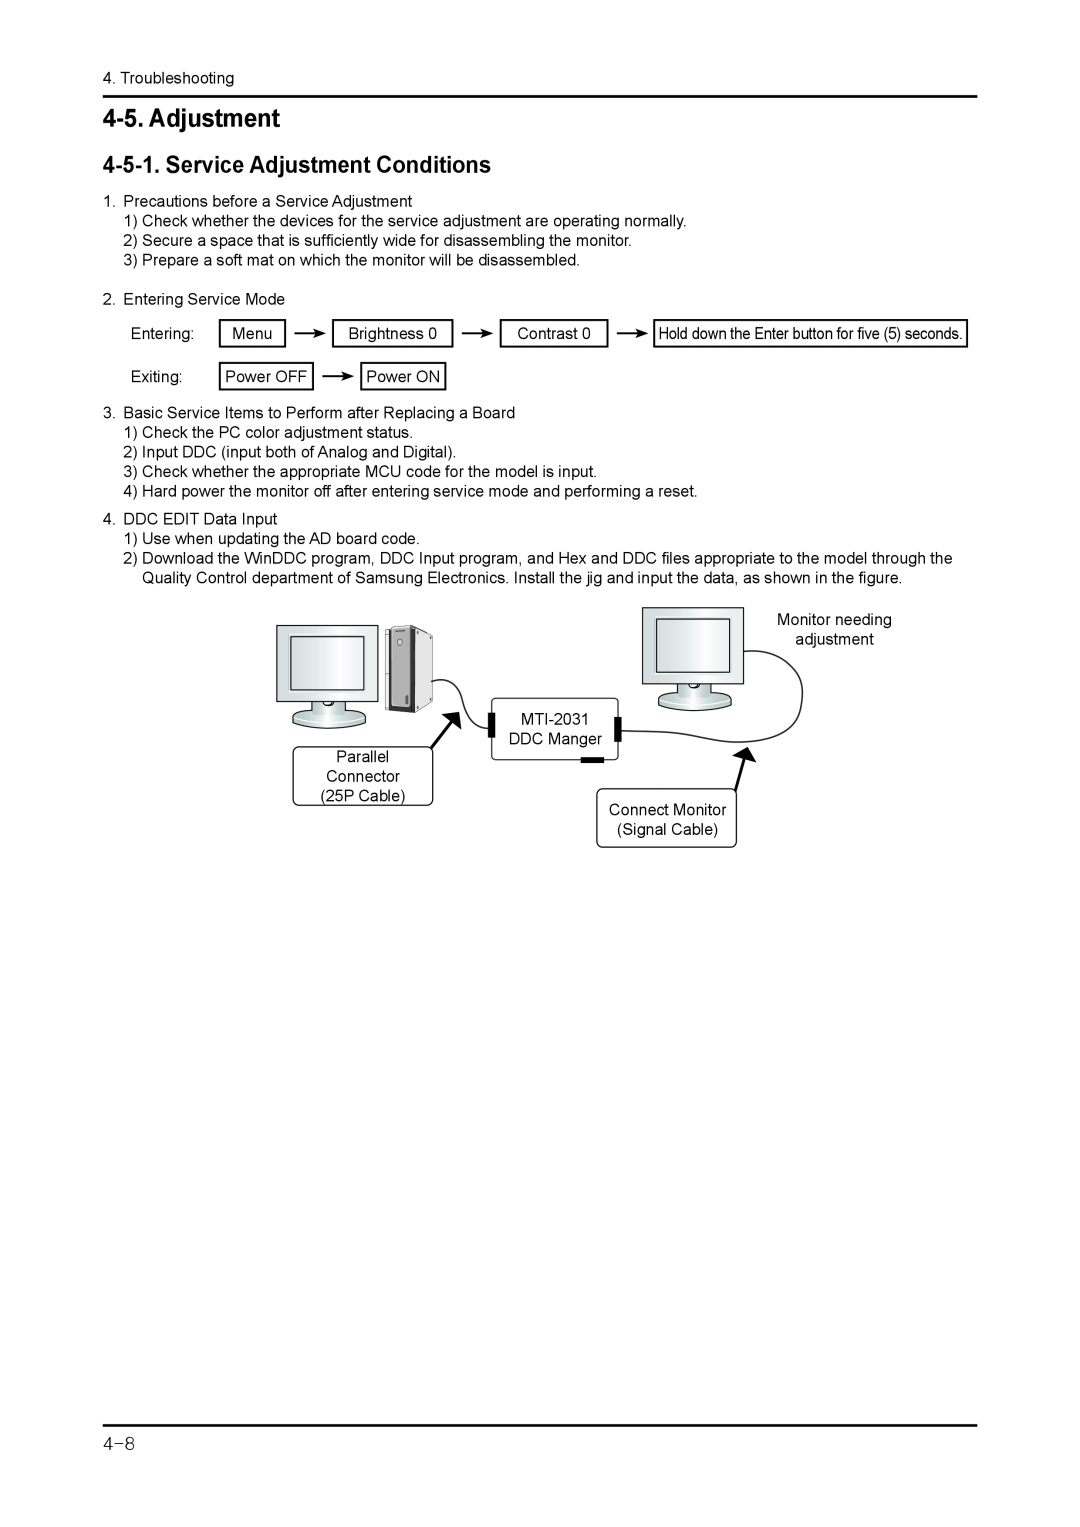 Samsung 943NWX service manual Service Adjustment Conditions 